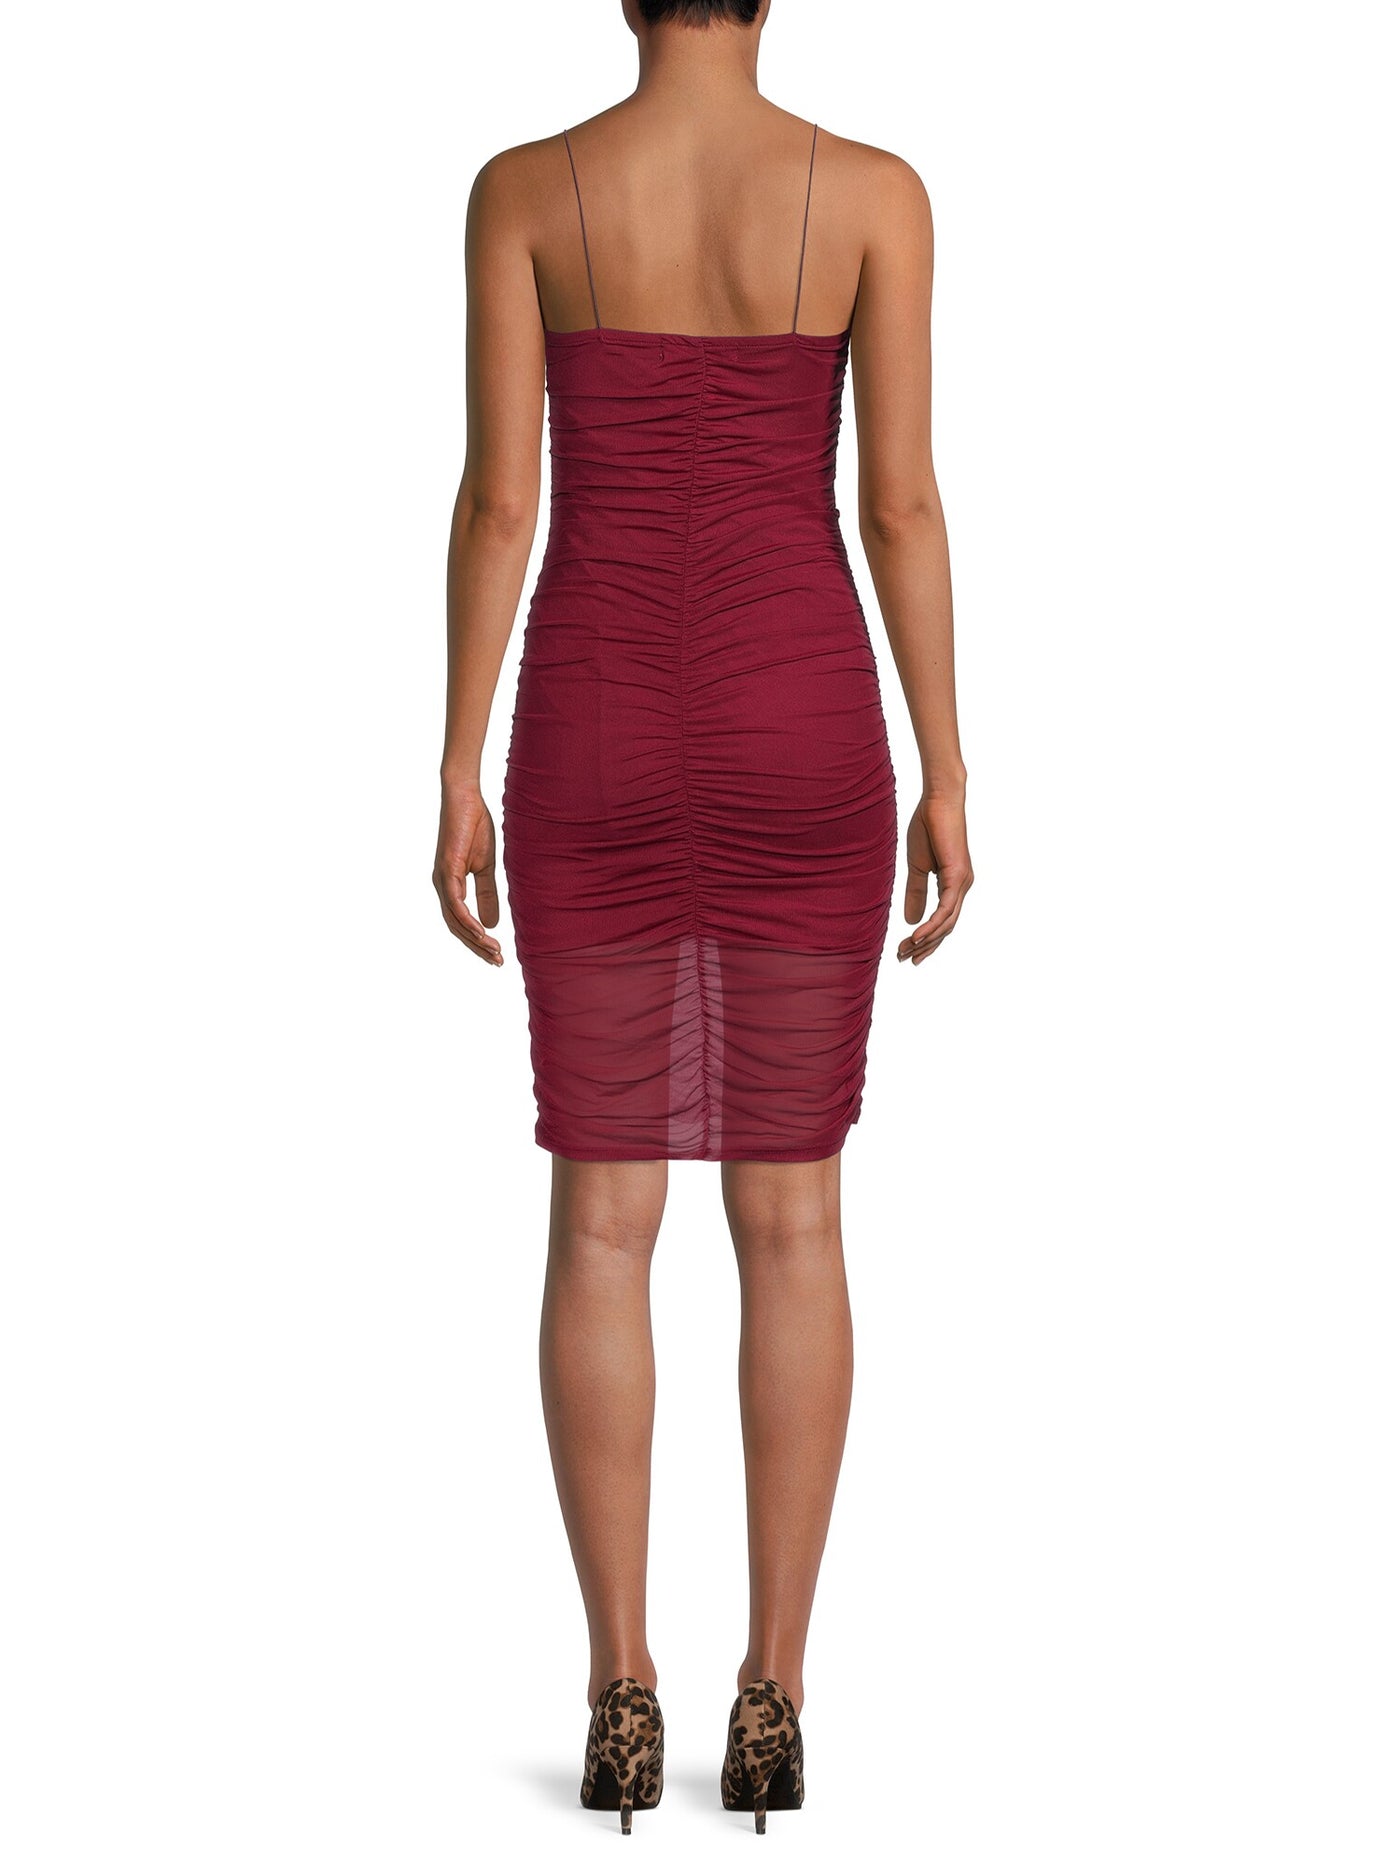 ALMOST FAMOUS Womens Maroon Sheer Ruched Lined Tie Hem Sleeveless Sweetheart Neckline Above The Knee Party Body Con Dress Juniors XL